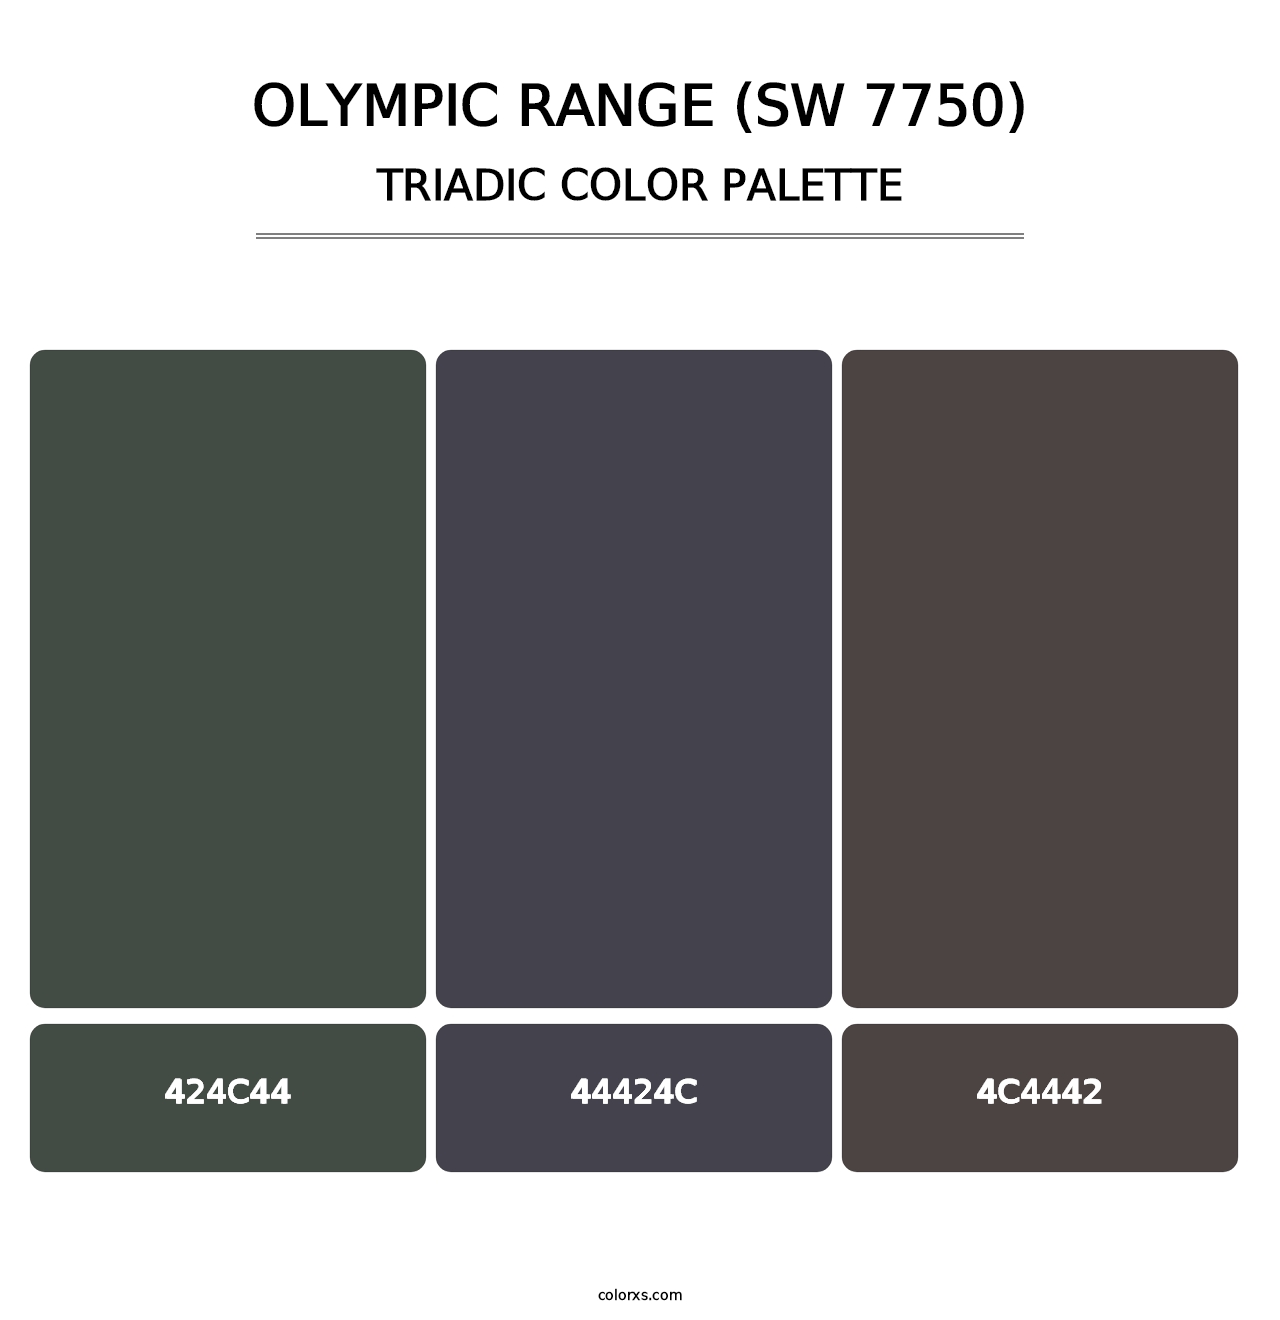 Olympic Range (SW 7750) - Triadic Color Palette